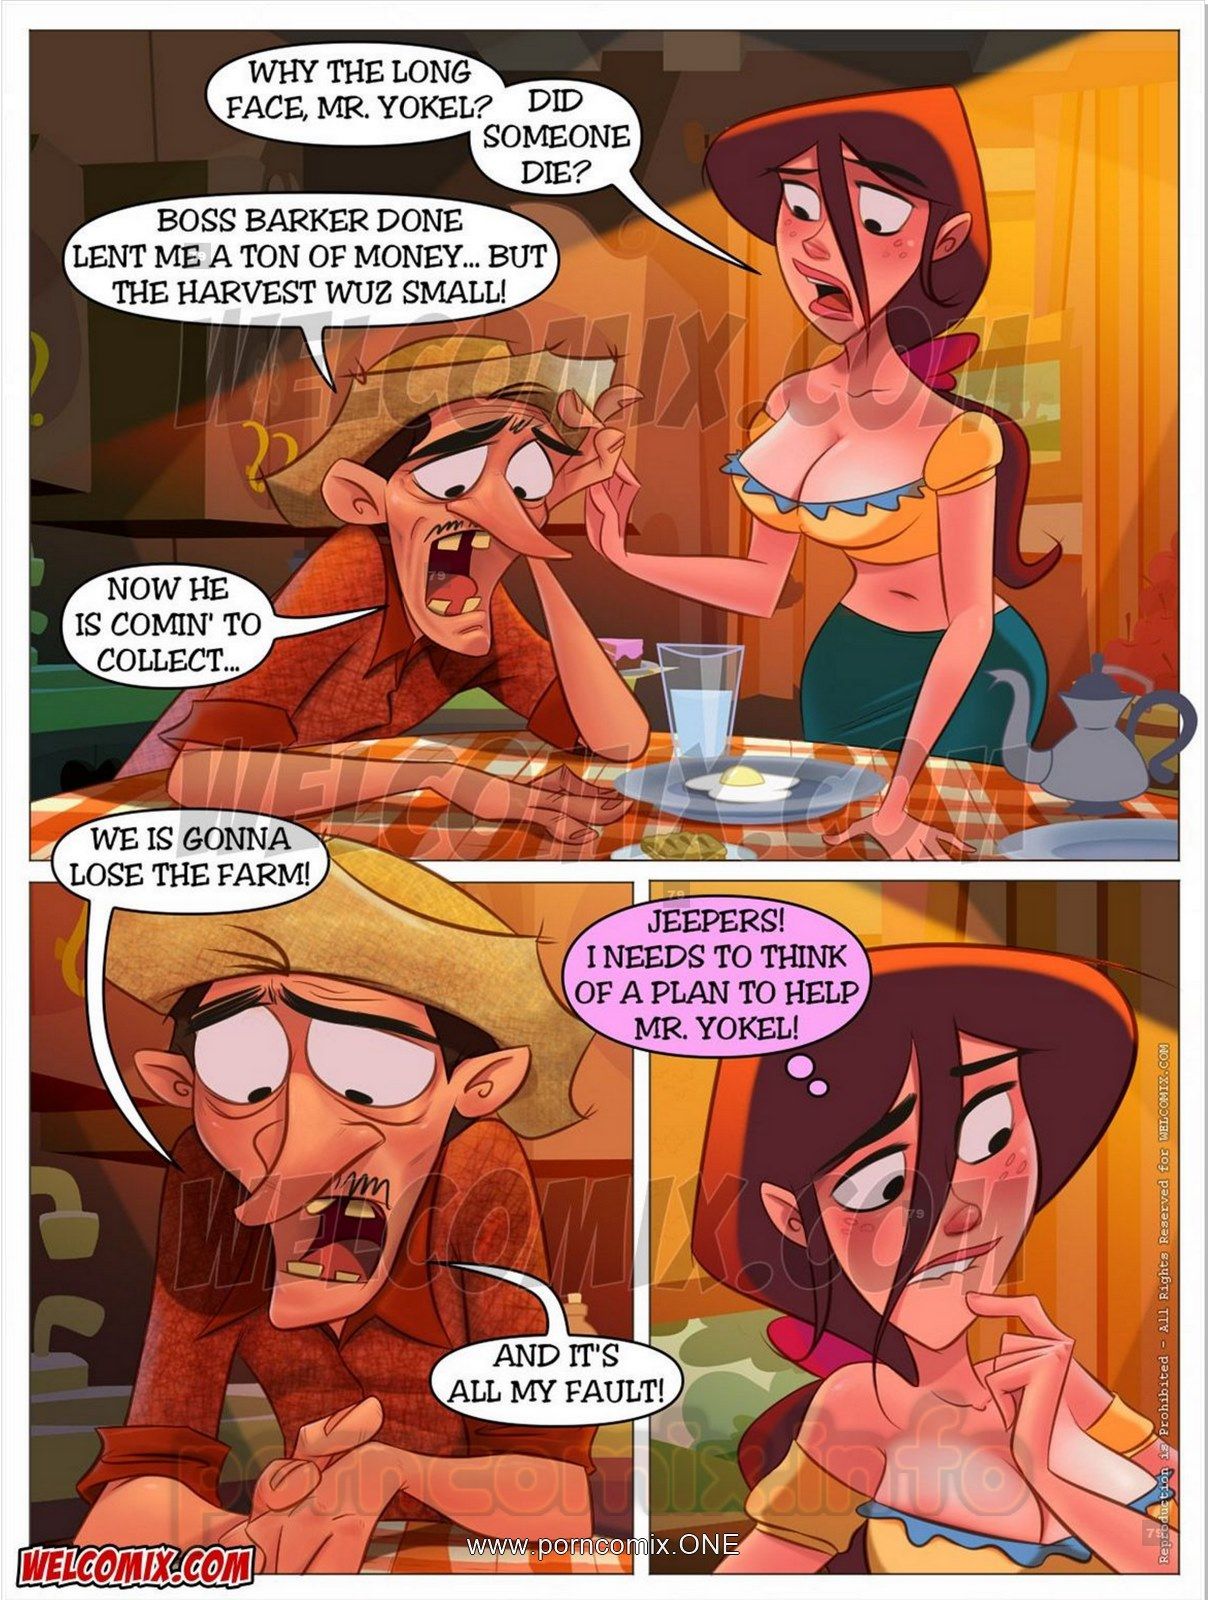 Welcomix,Hillbilly Gang 13 - Farm Mortgage page 2